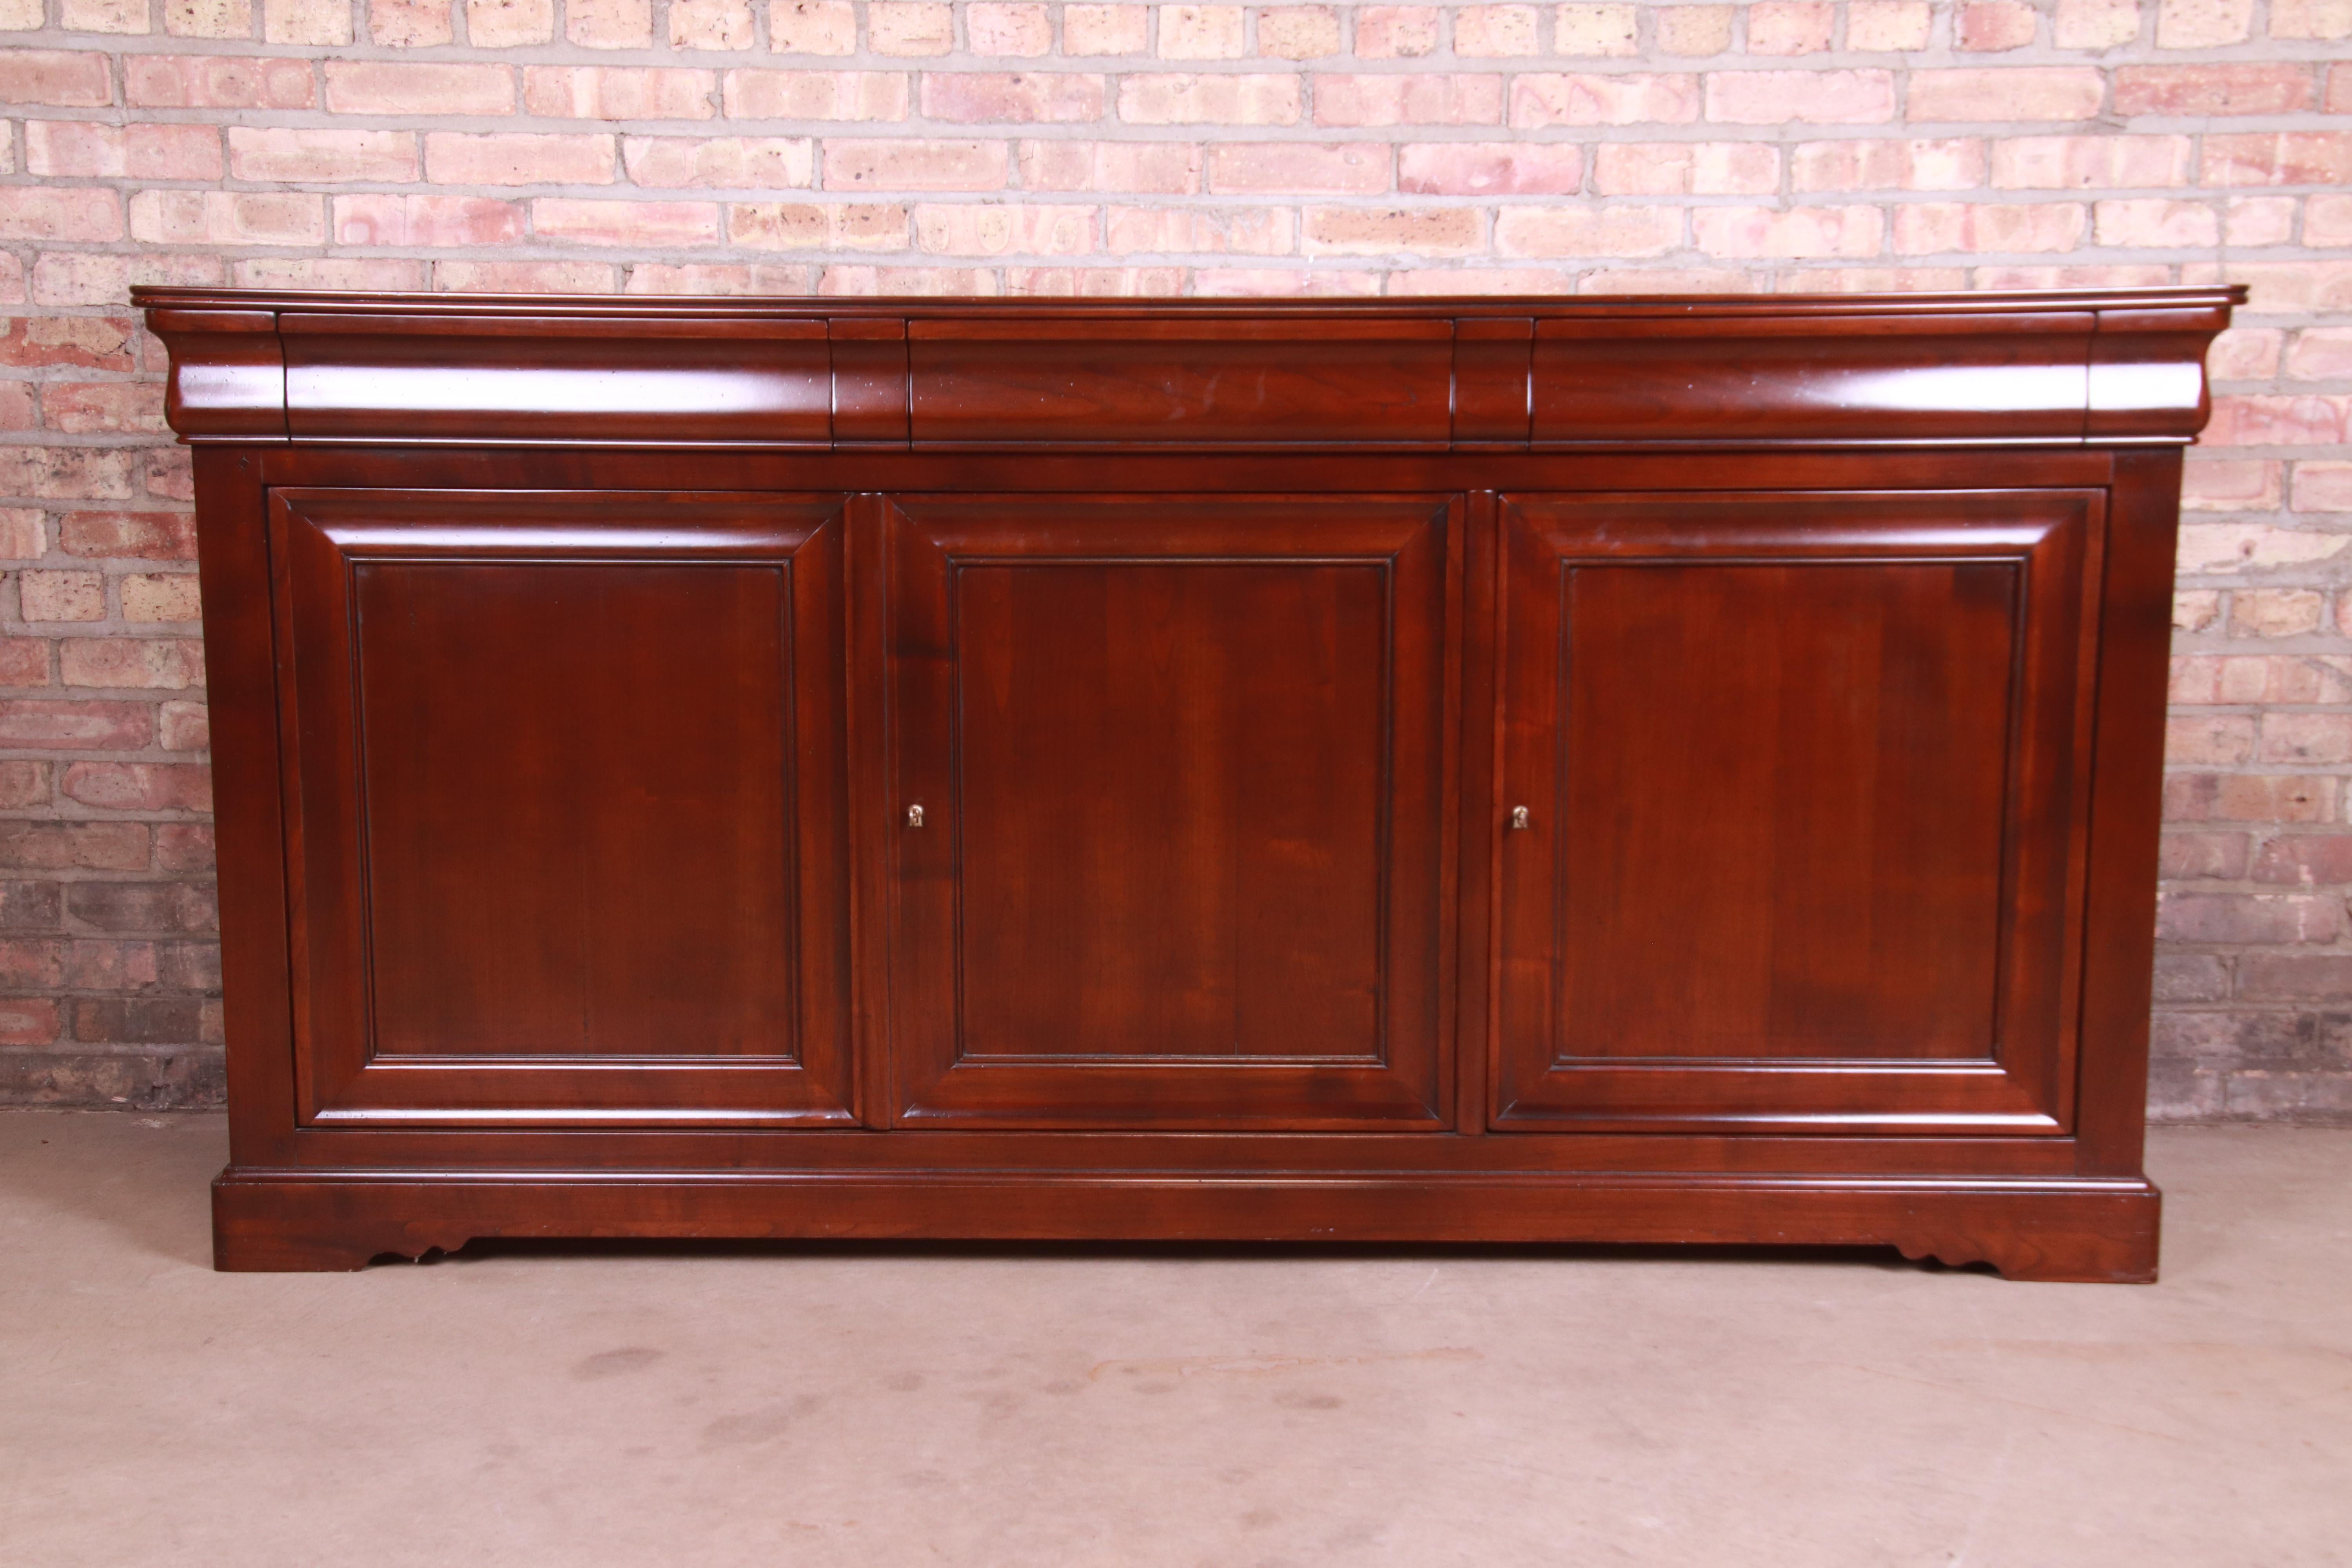 A gorgeous French Provincial solid cherry wood sideboard, credenza, or bar cabinet

By Grange,

France, 2000

Measures: 74.5